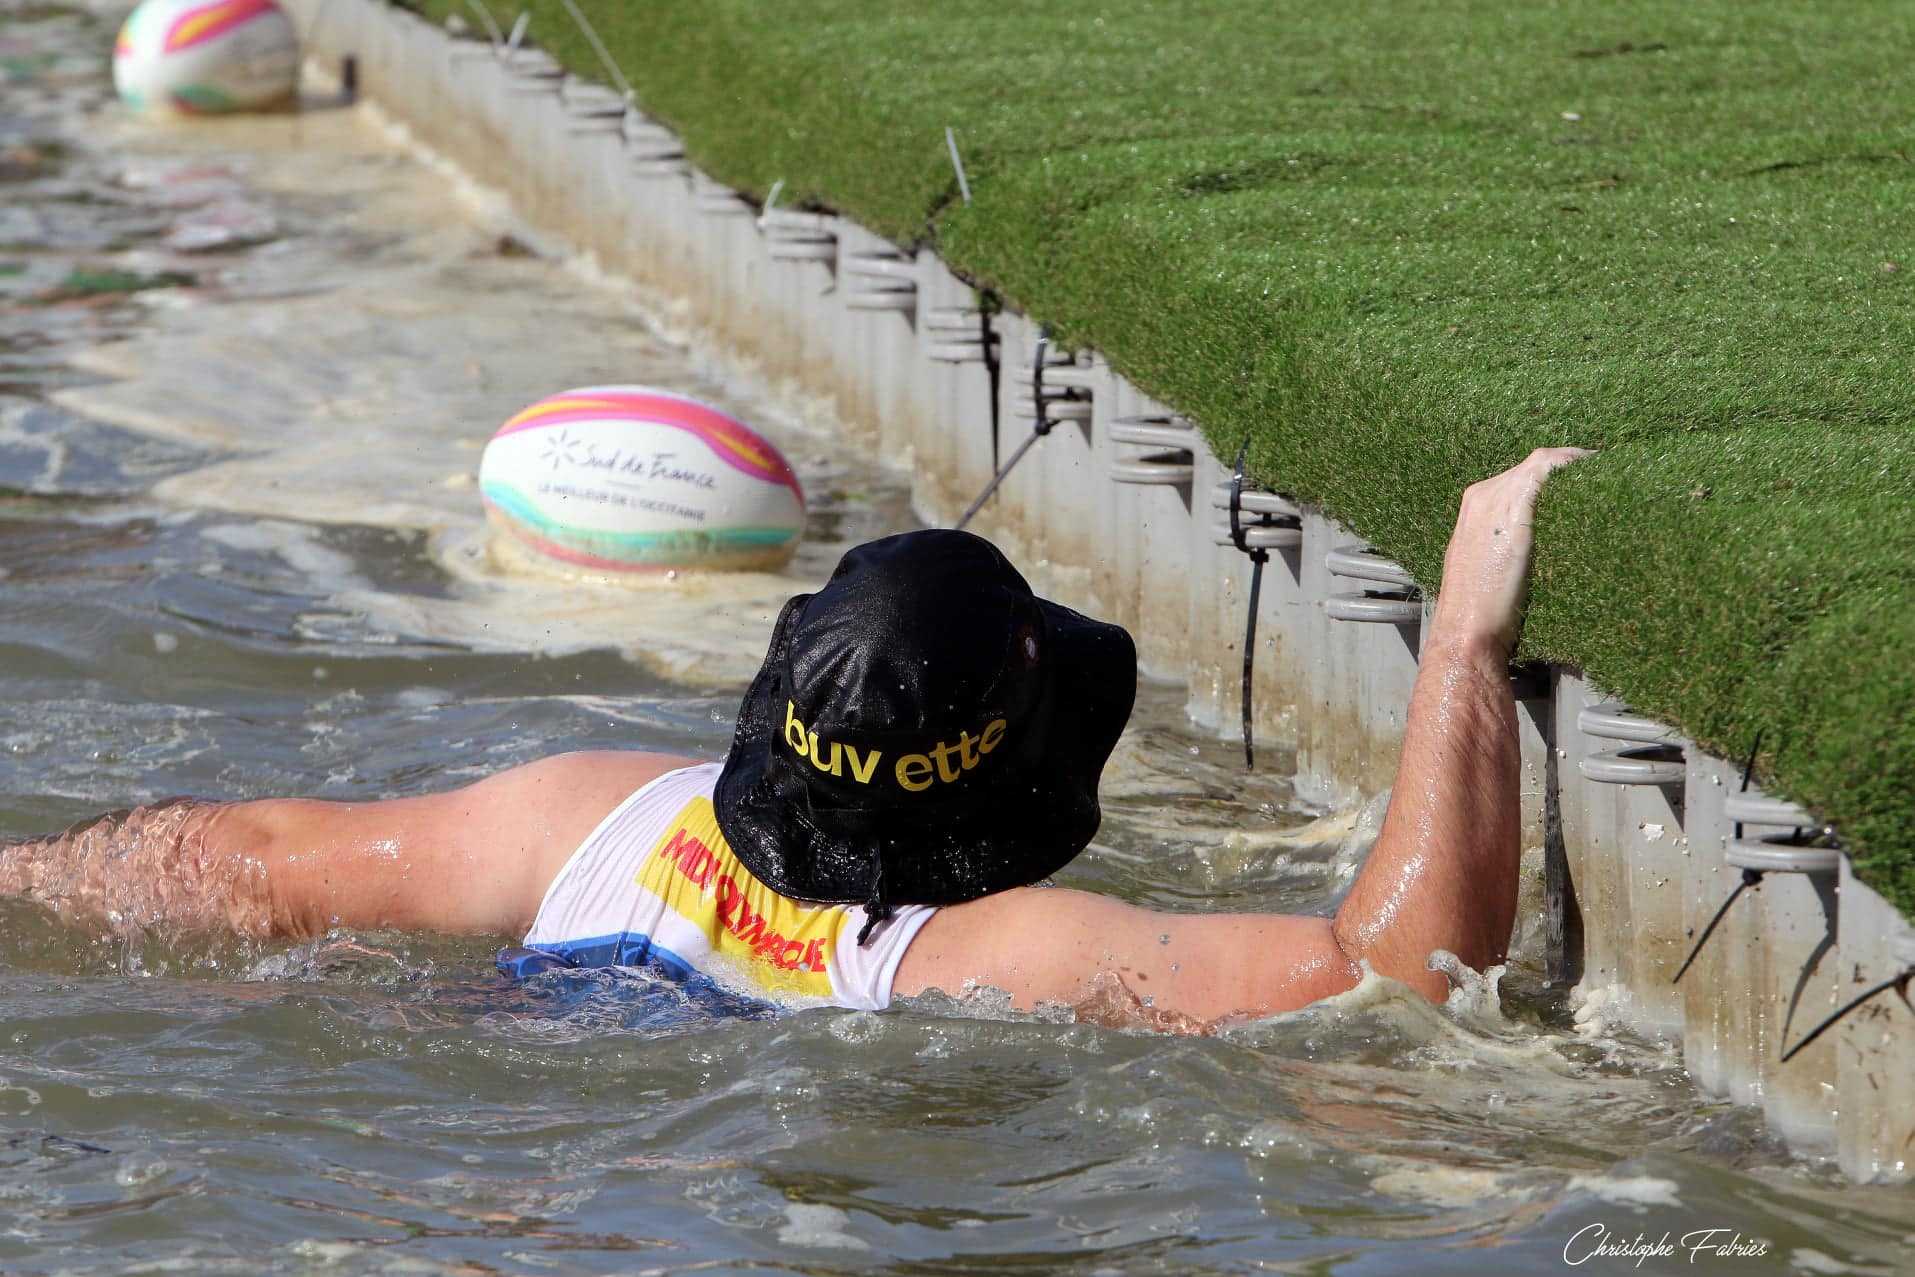 waterugby2021 (8)